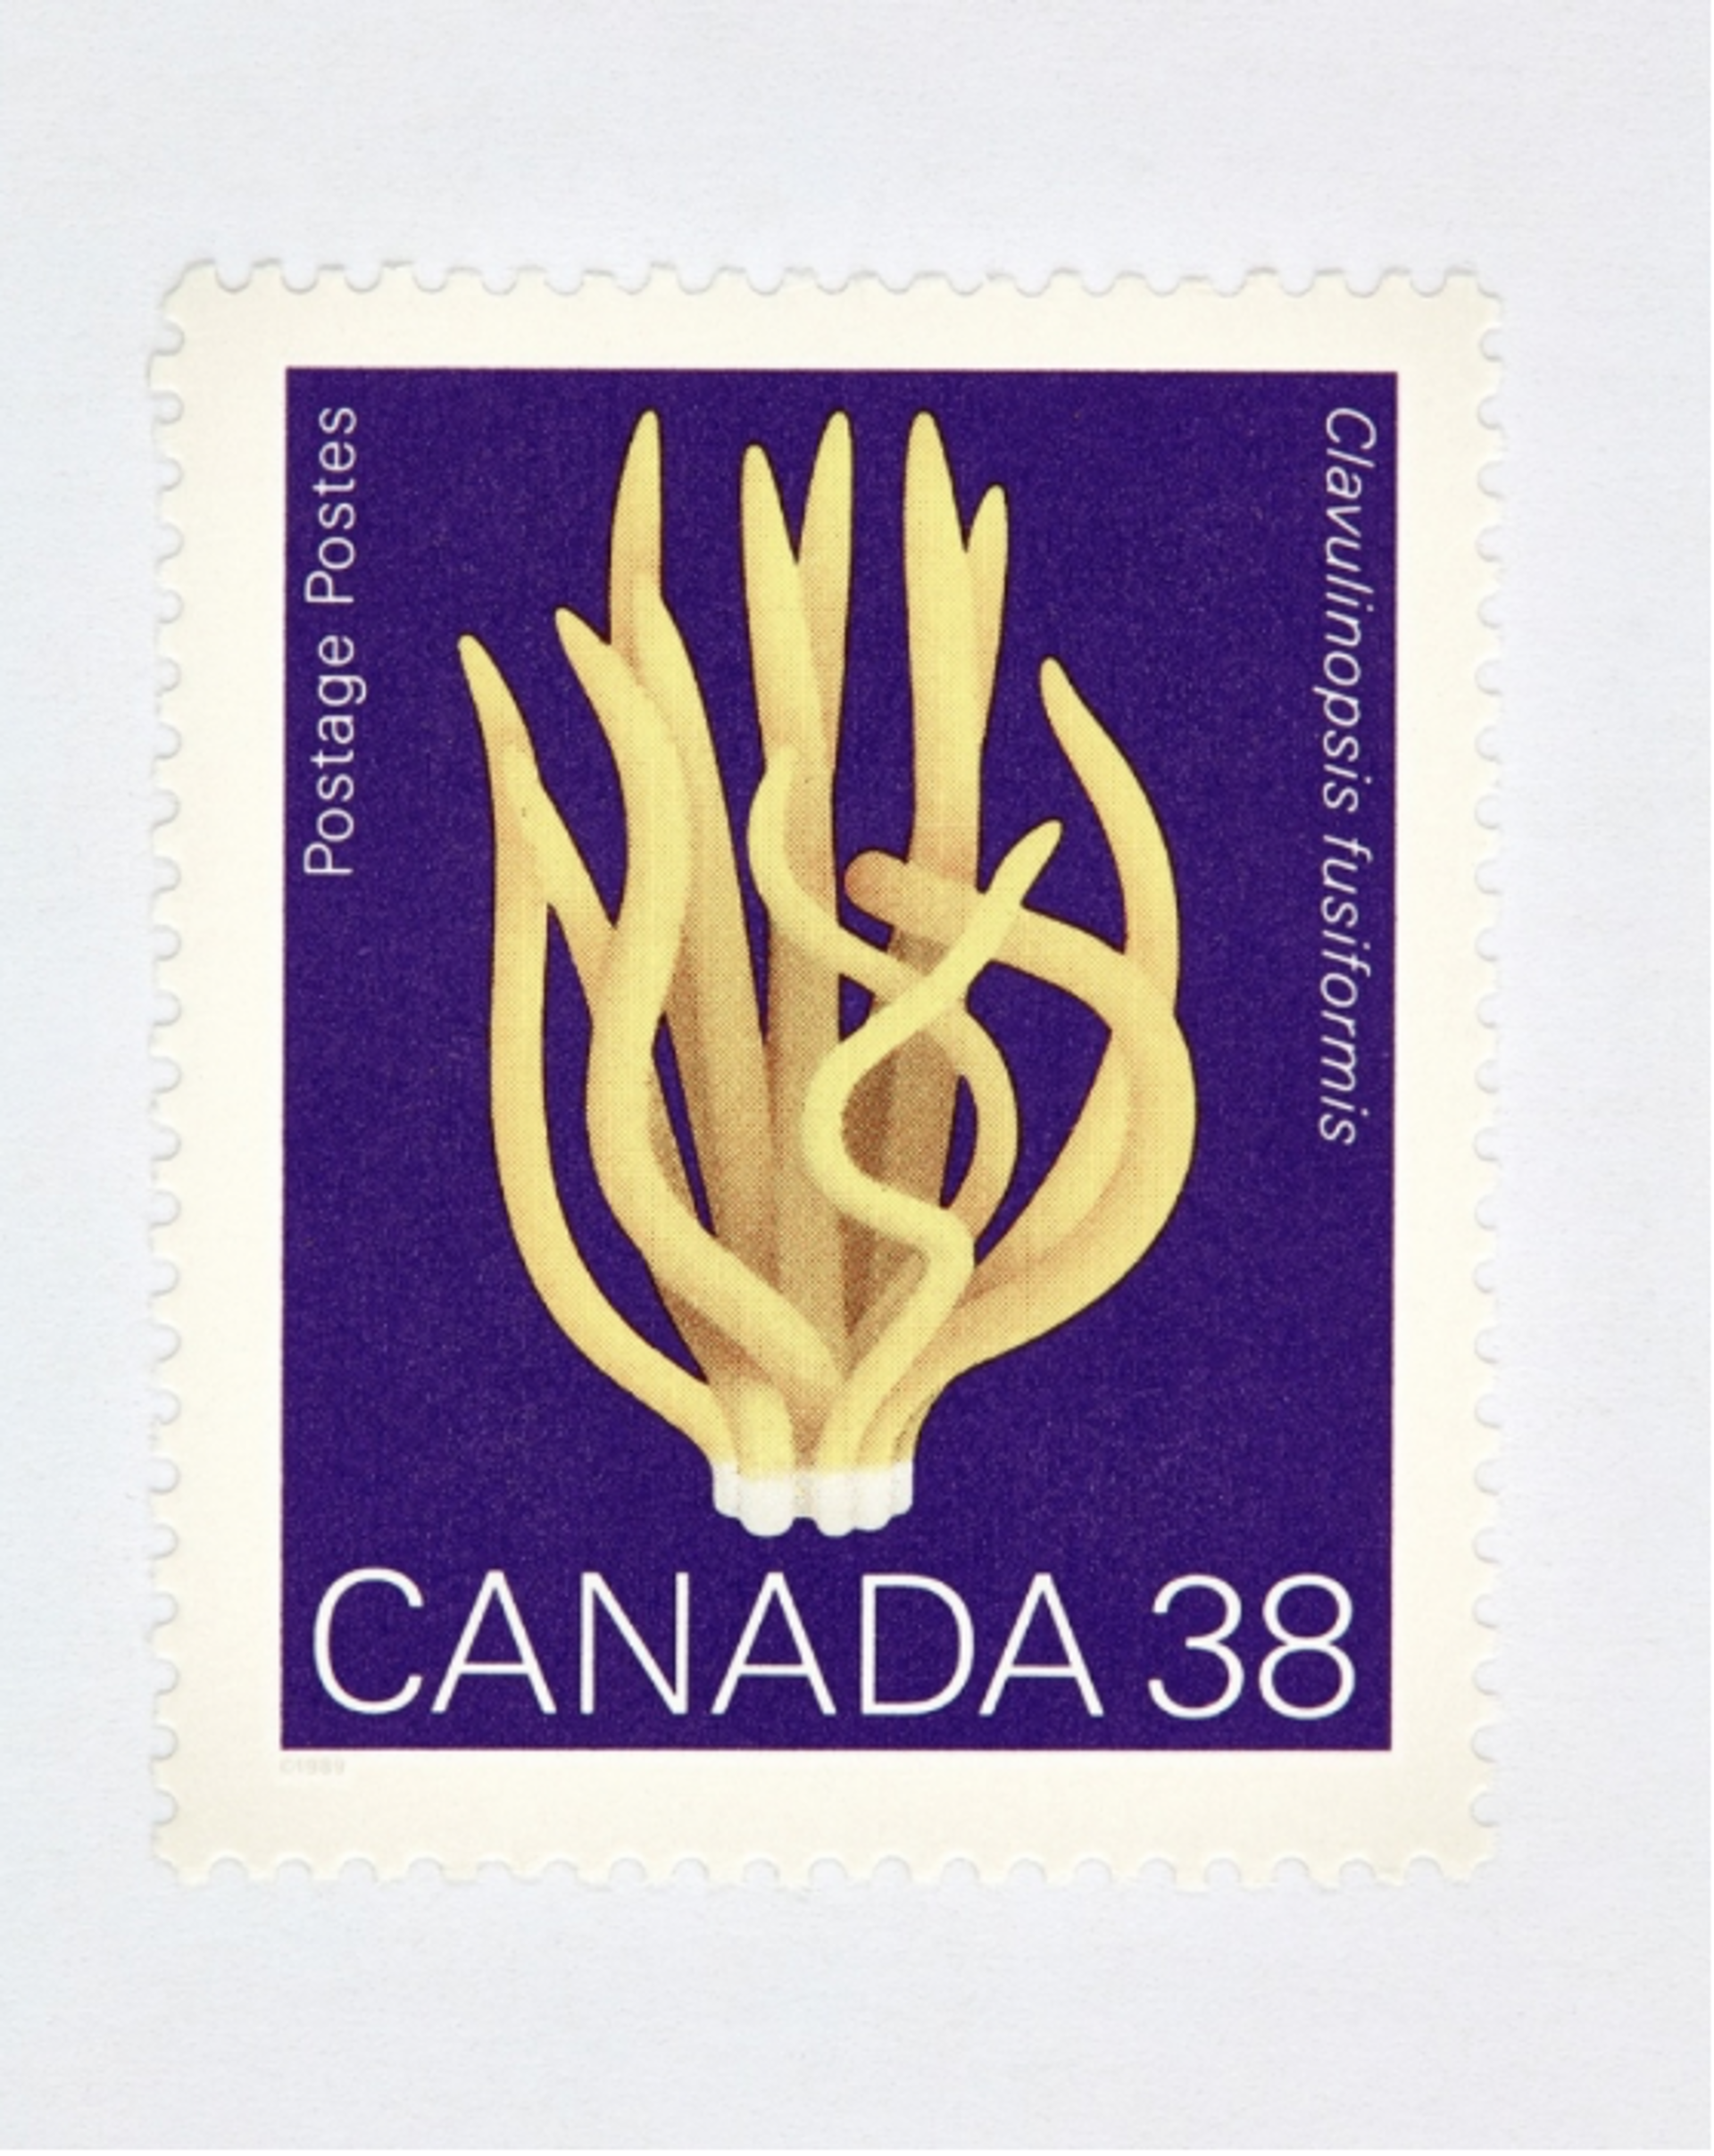 Canada 38 Mushroom Stamp (Purple) by Peter Andrew Lusztyk | Collectibles